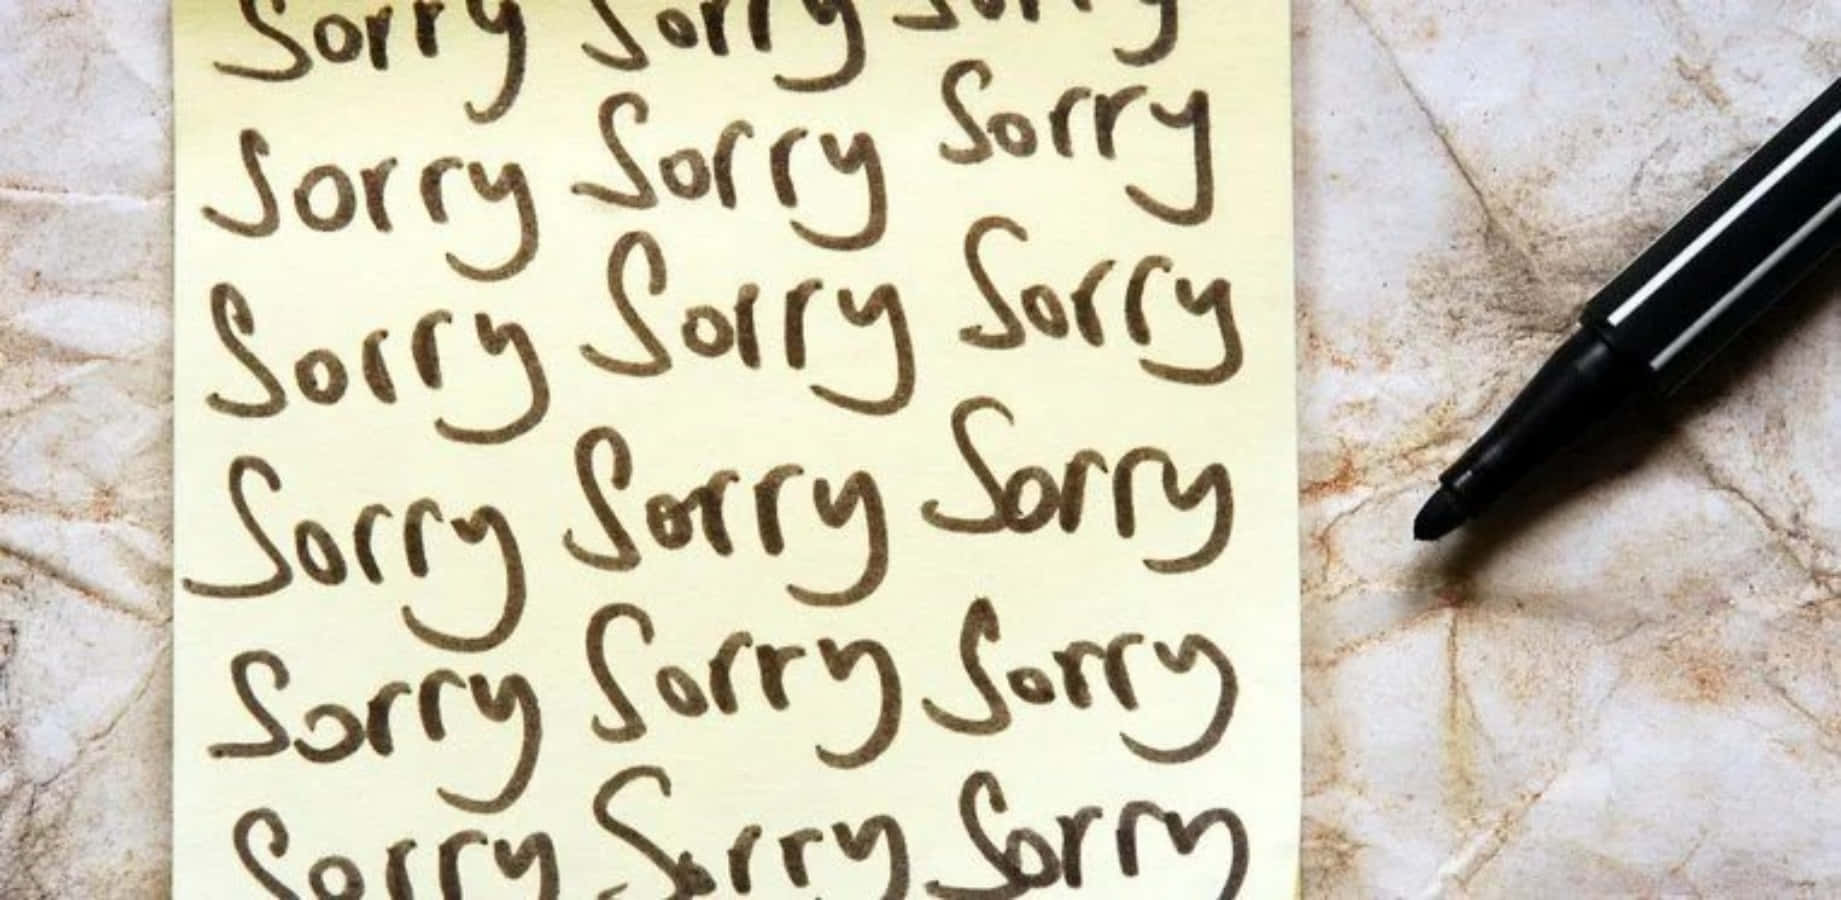 Sorry Apology Handwritten Note Picture